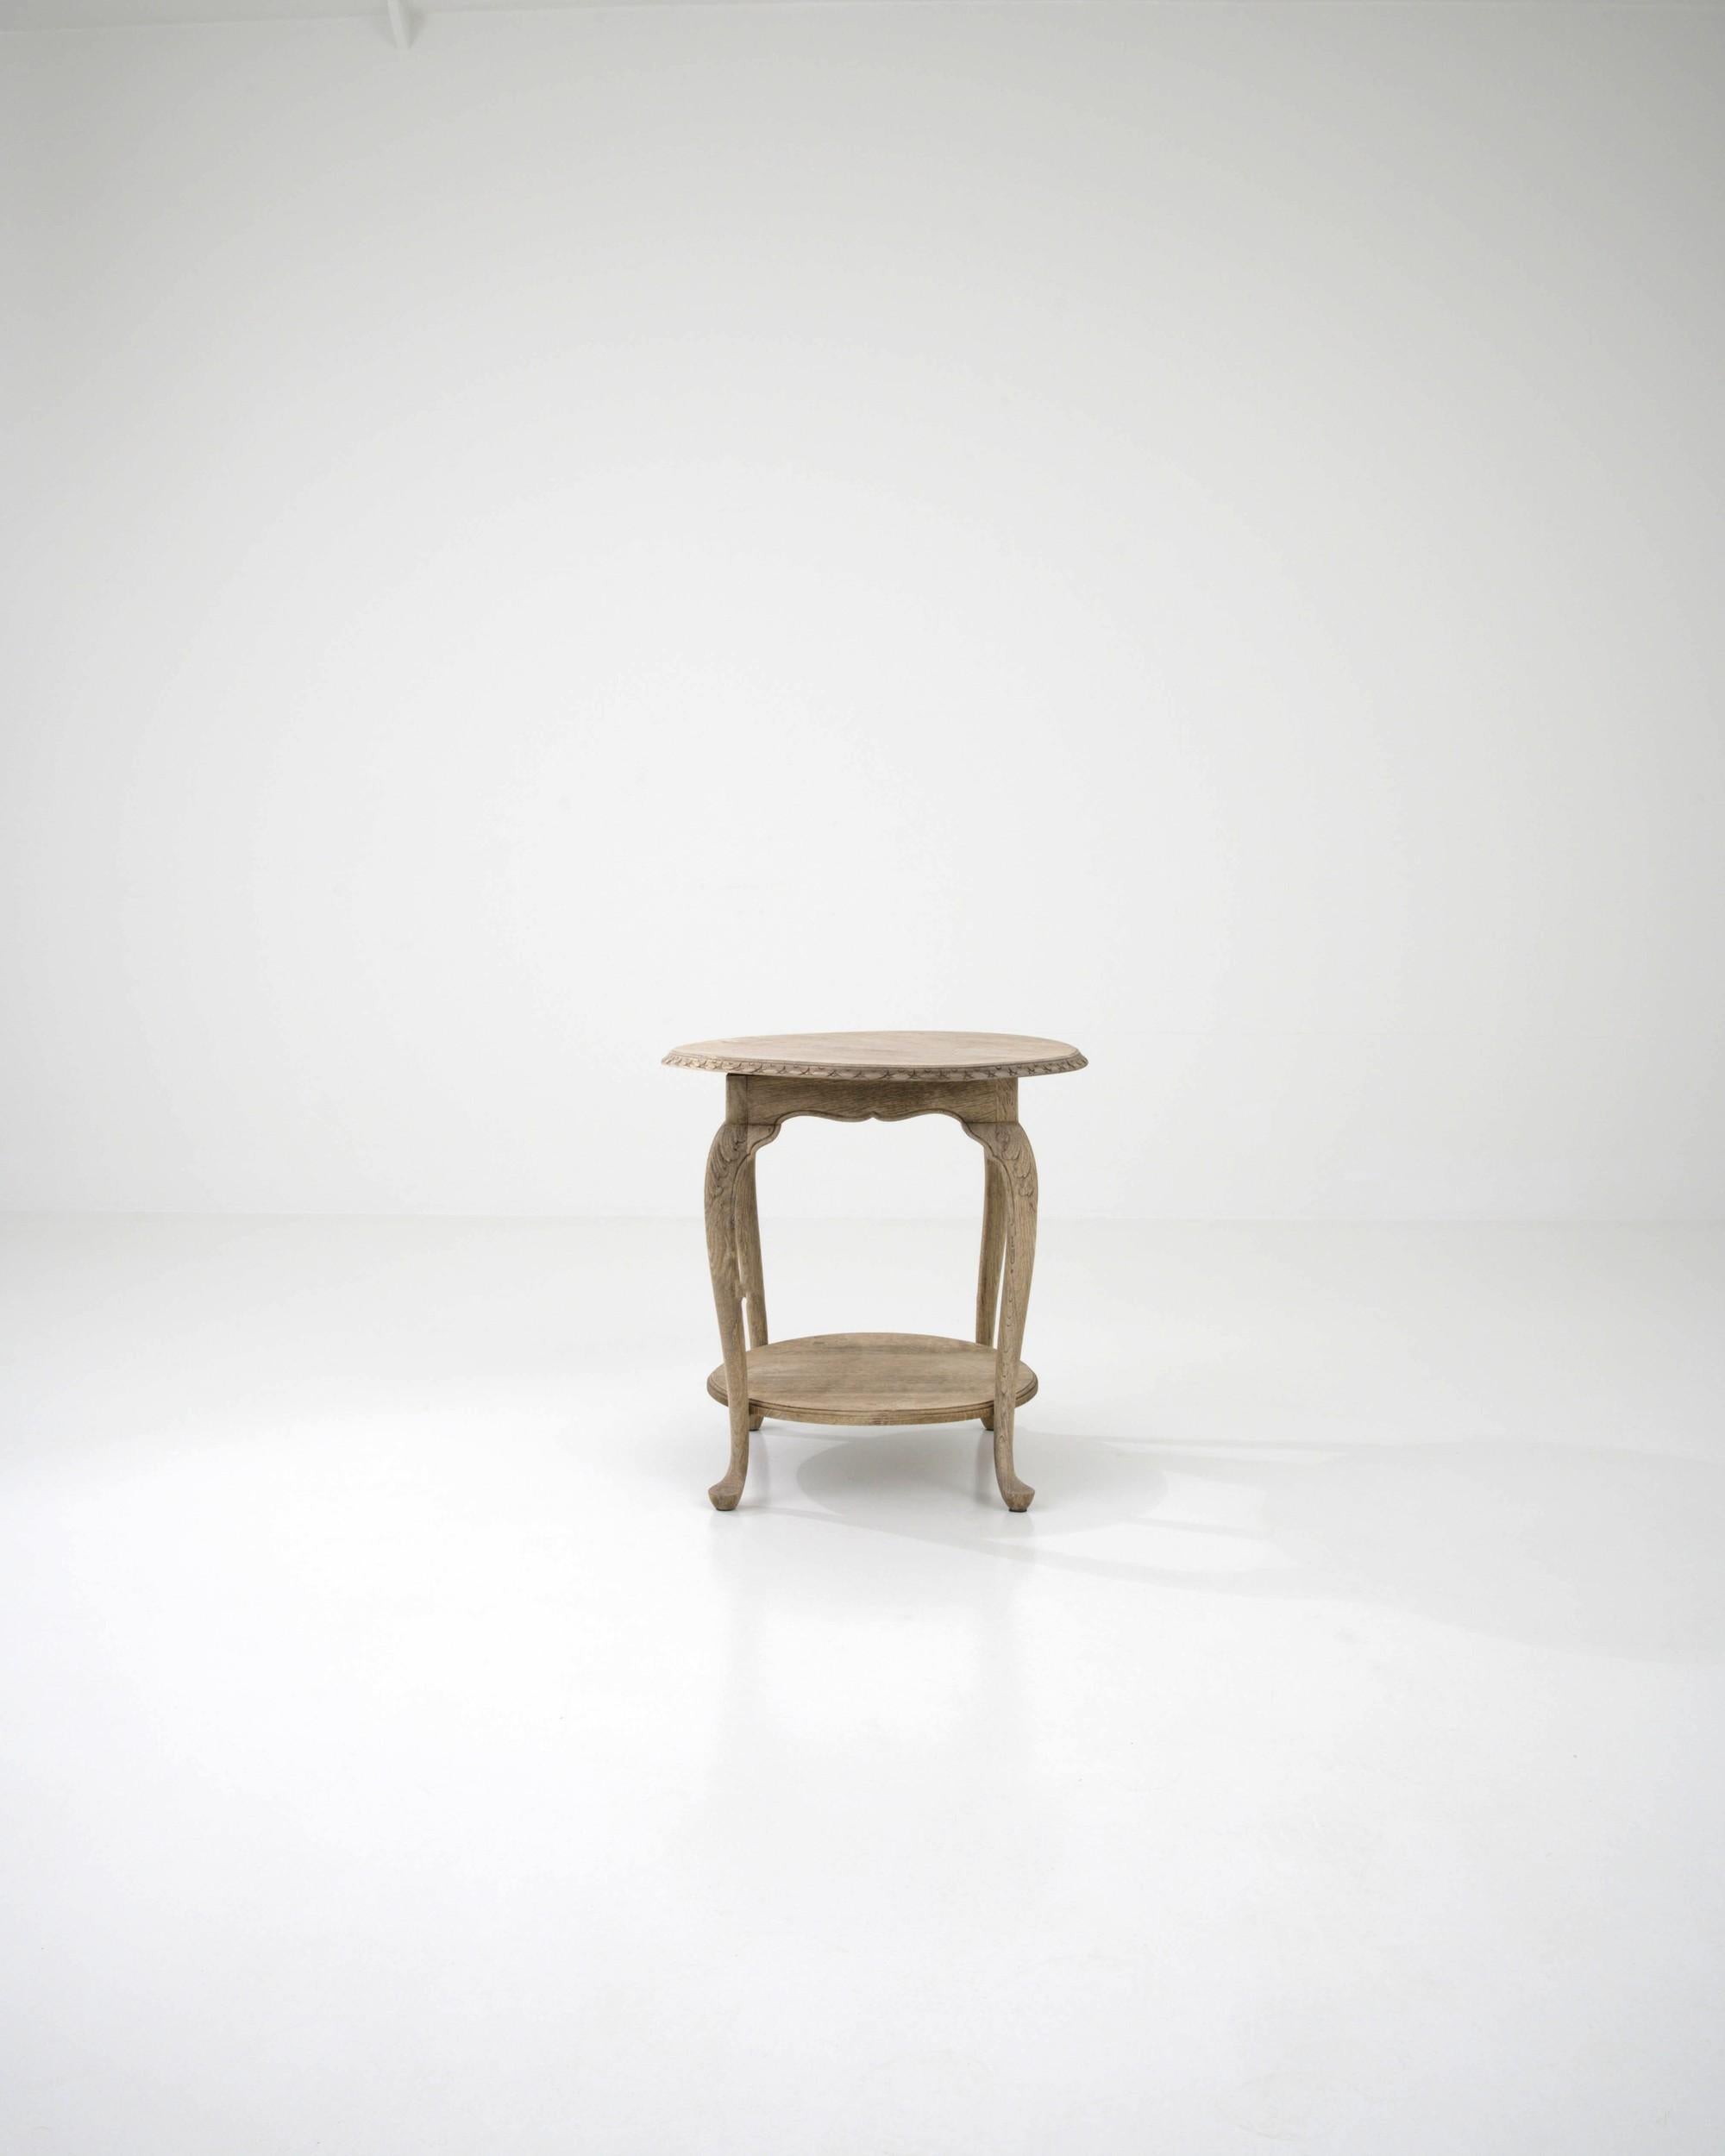 Made in France in the 20th Century, this oak side table is defined by the shape of its round table top. The subtle organic feel of the ovoid top is enhanced by the table's finish and its decorative elements. Natural oak has been enhanced with a